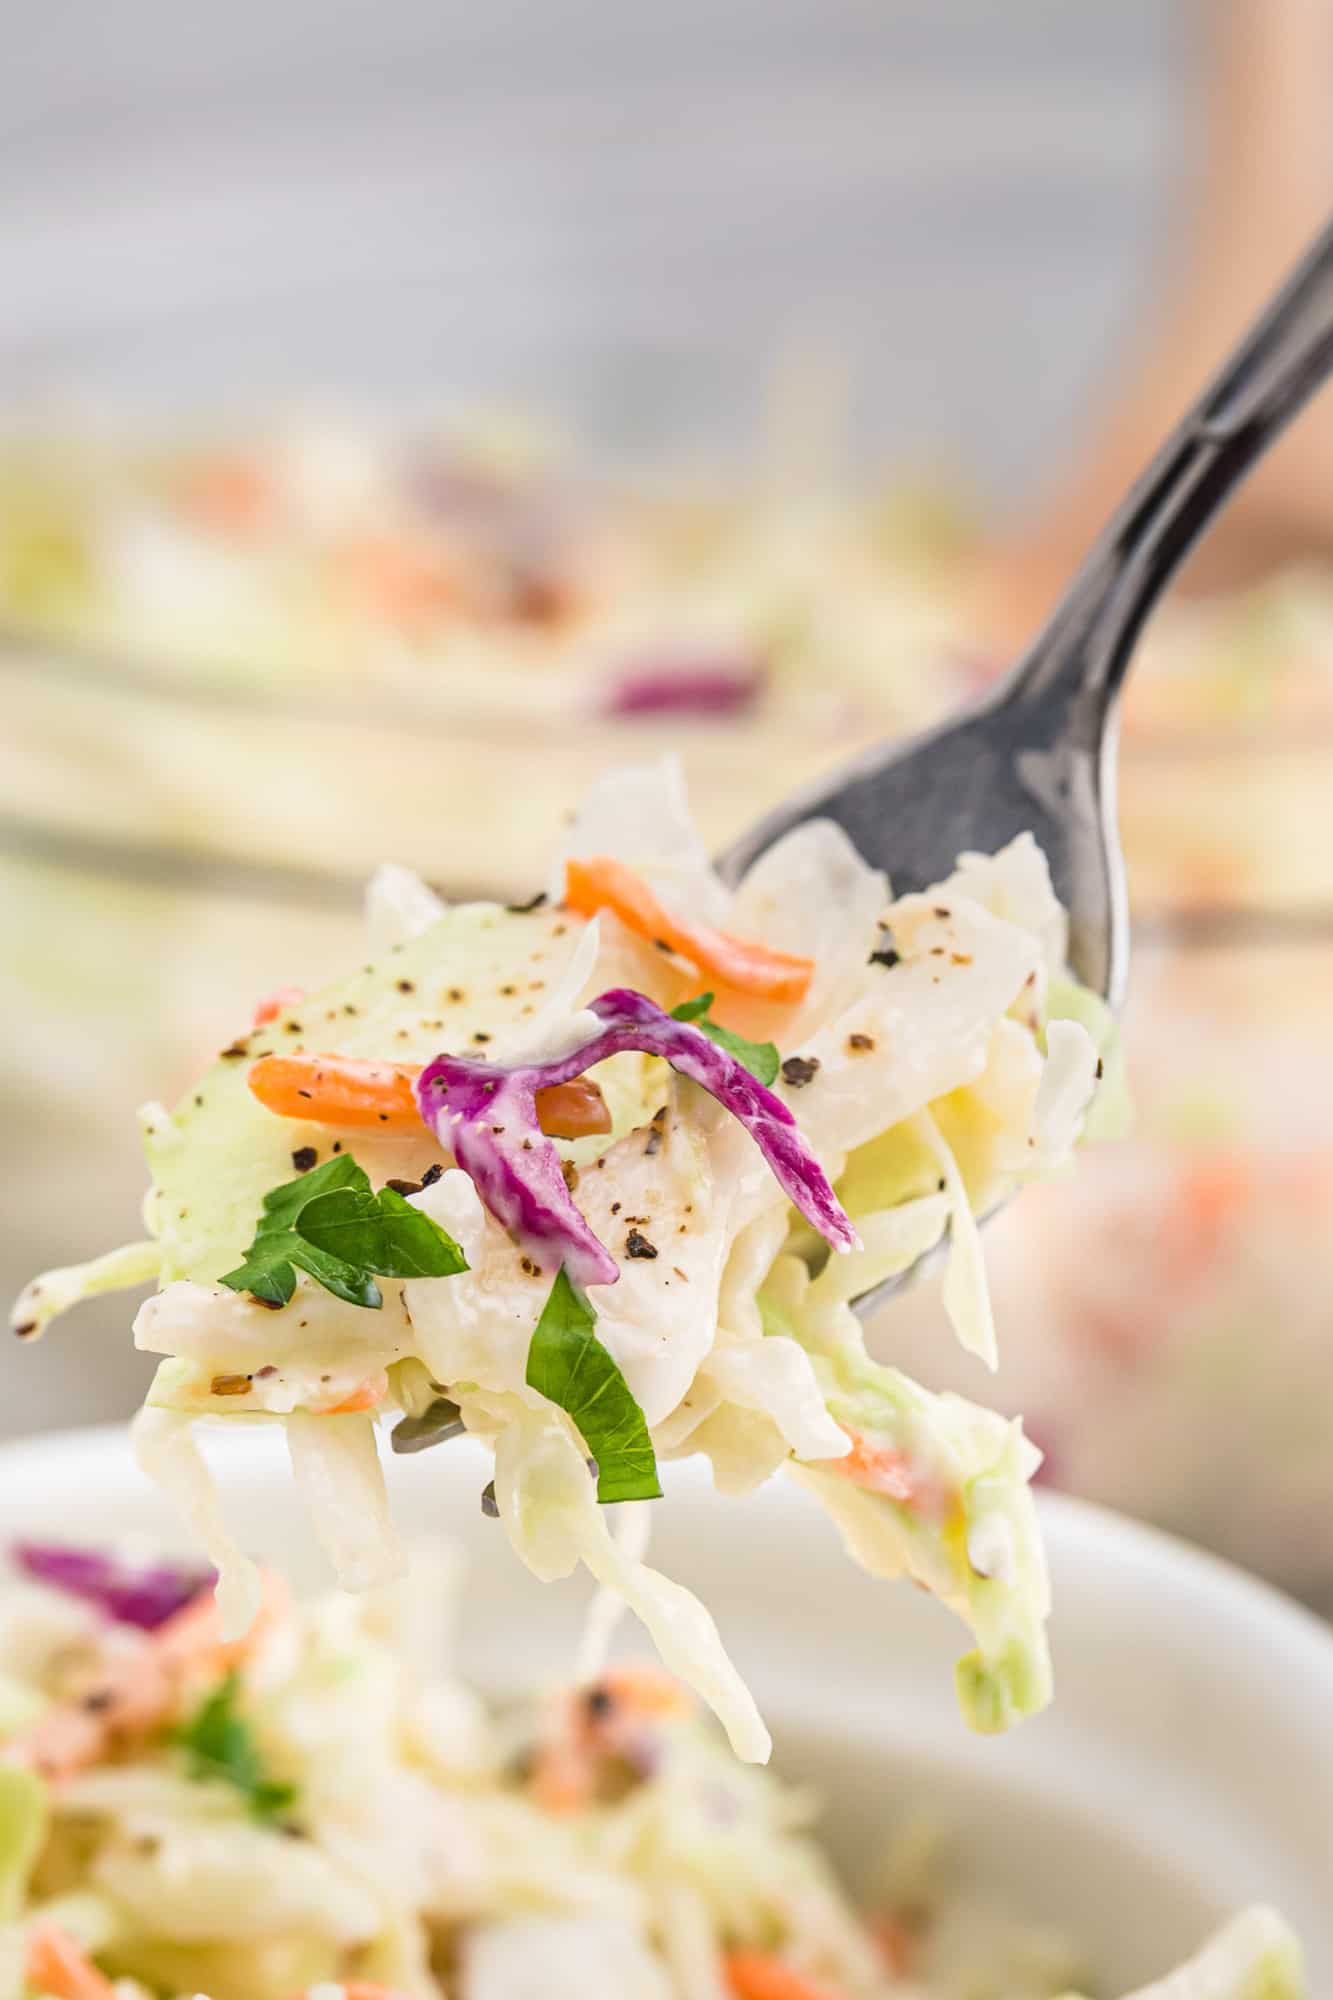 Coleslaw on a fork, showing components.